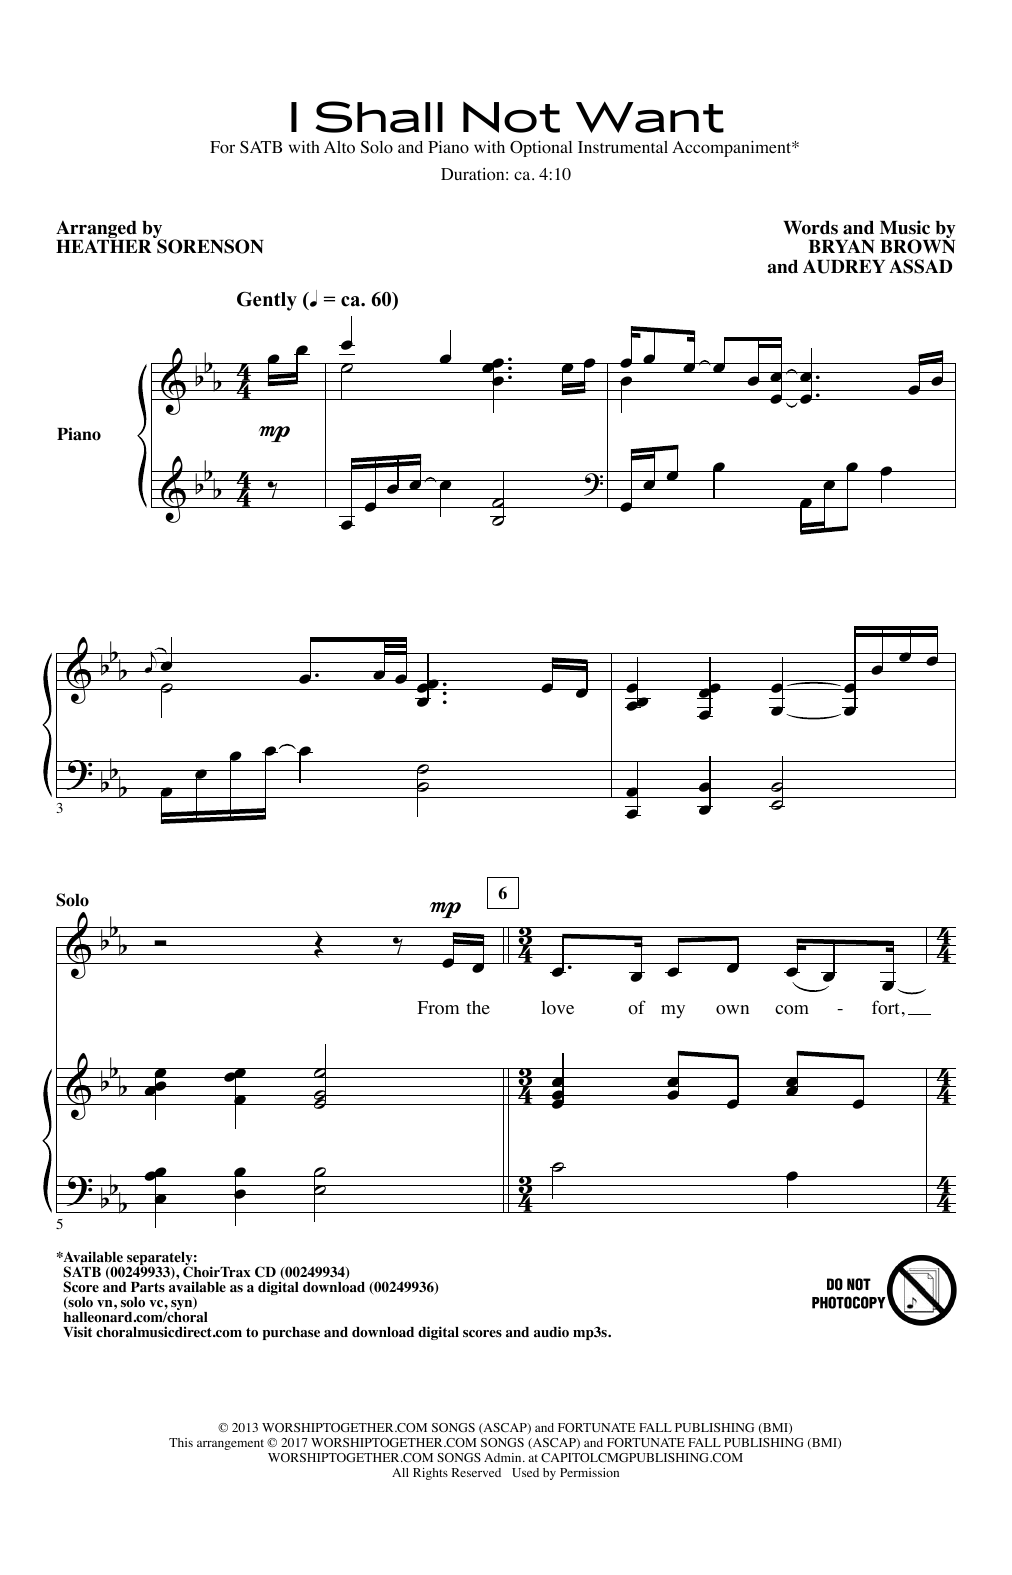 Download Heather Sorenson I Shall Not Want Sheet Music